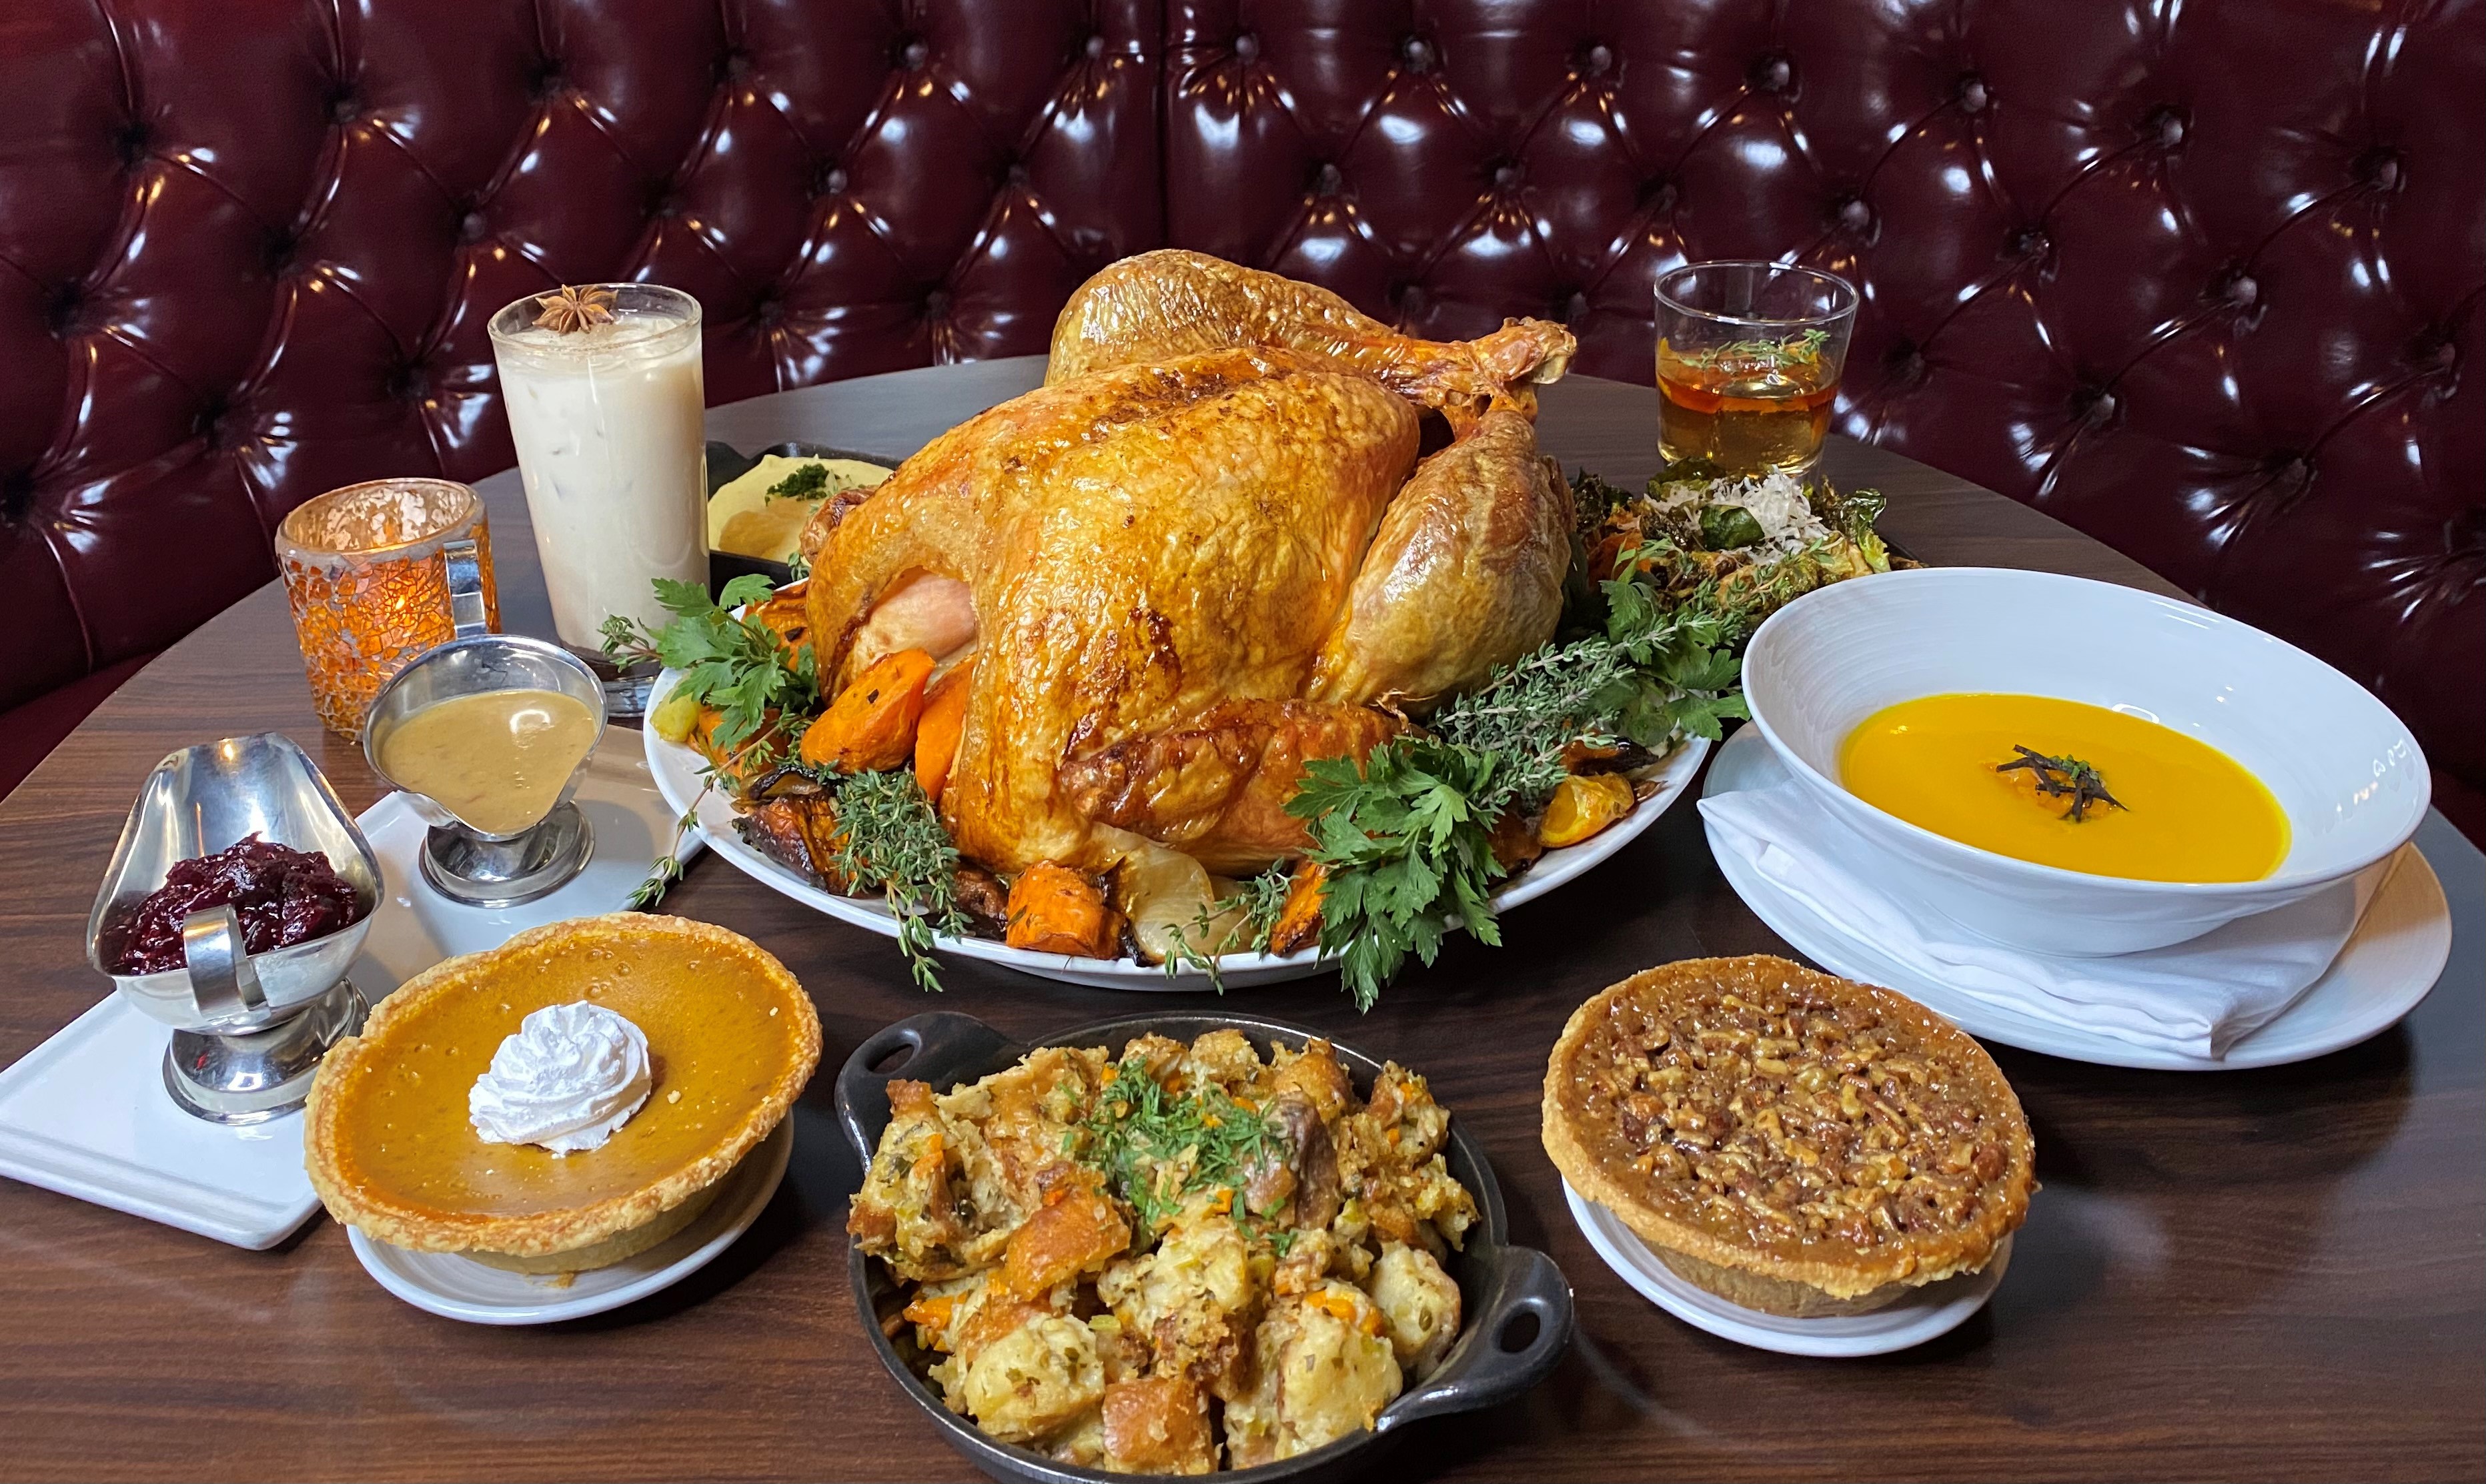 Thanksgiving food special 2023 at Oscar's Steakhouse inside the Plaza Hotel in DTLV